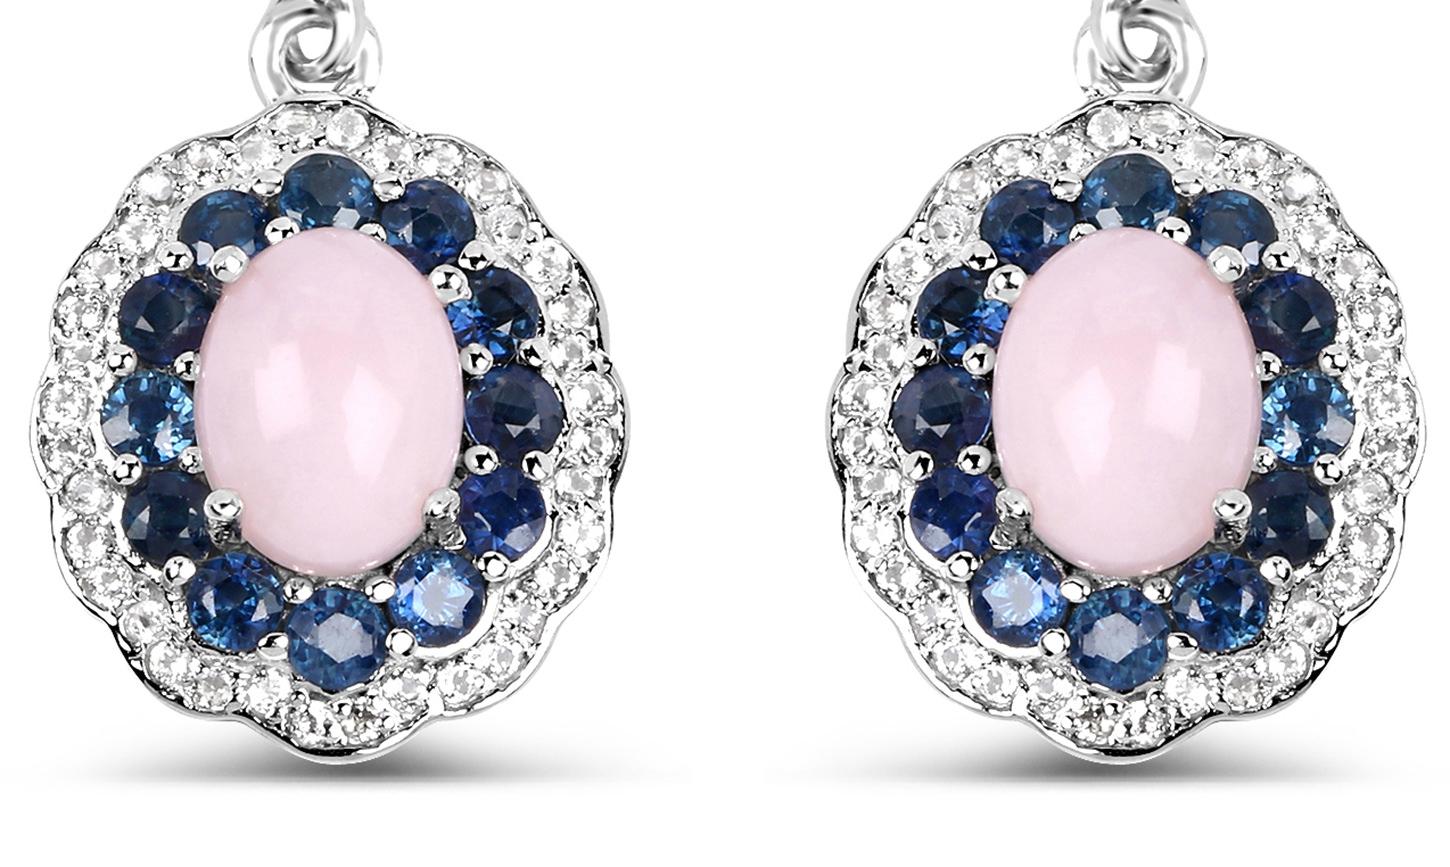 It comes with the appraisal by GIA GG/AJP 
Stones: Pink Opal, Blue Sapphire, White Topaz
Pink Opal = 2.20 Carats
Cut: Oval, Cabochon
Blue Sapphire = 1.50 Carats
Cut: Round
White Topaz = 0.35 Carats
Total Quantity Of Stones: 98
Metal: Silver
Rhodium